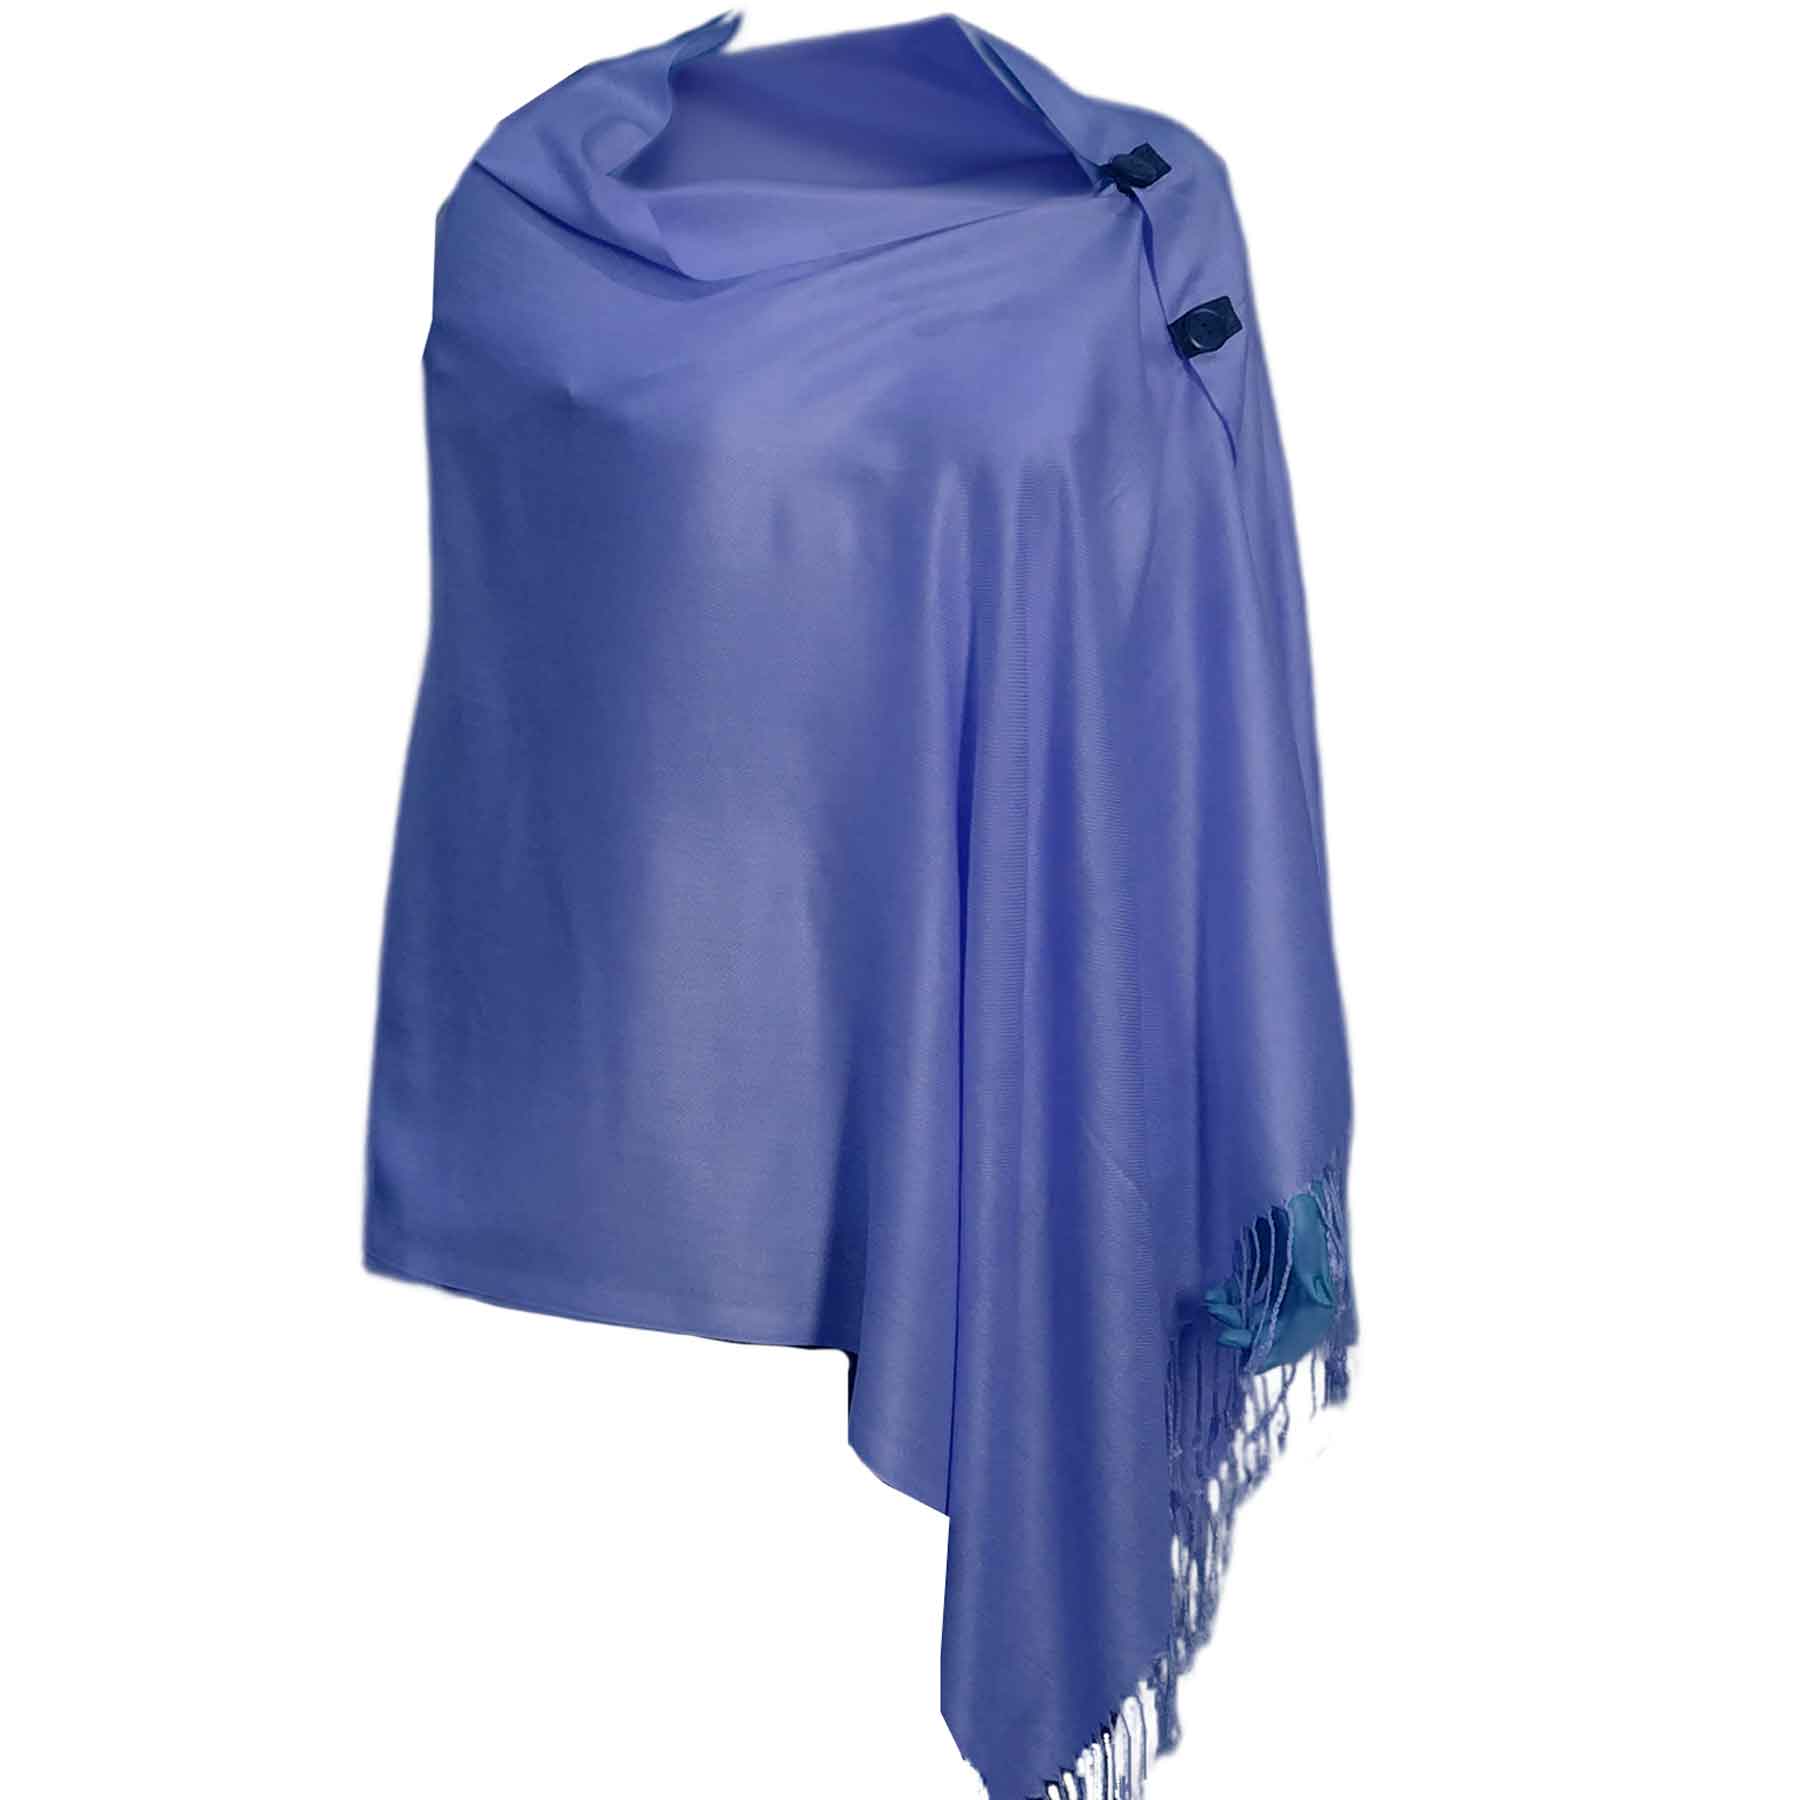 3109 - Solid Royal Blue<br>
Pashmina Style Button Shawl